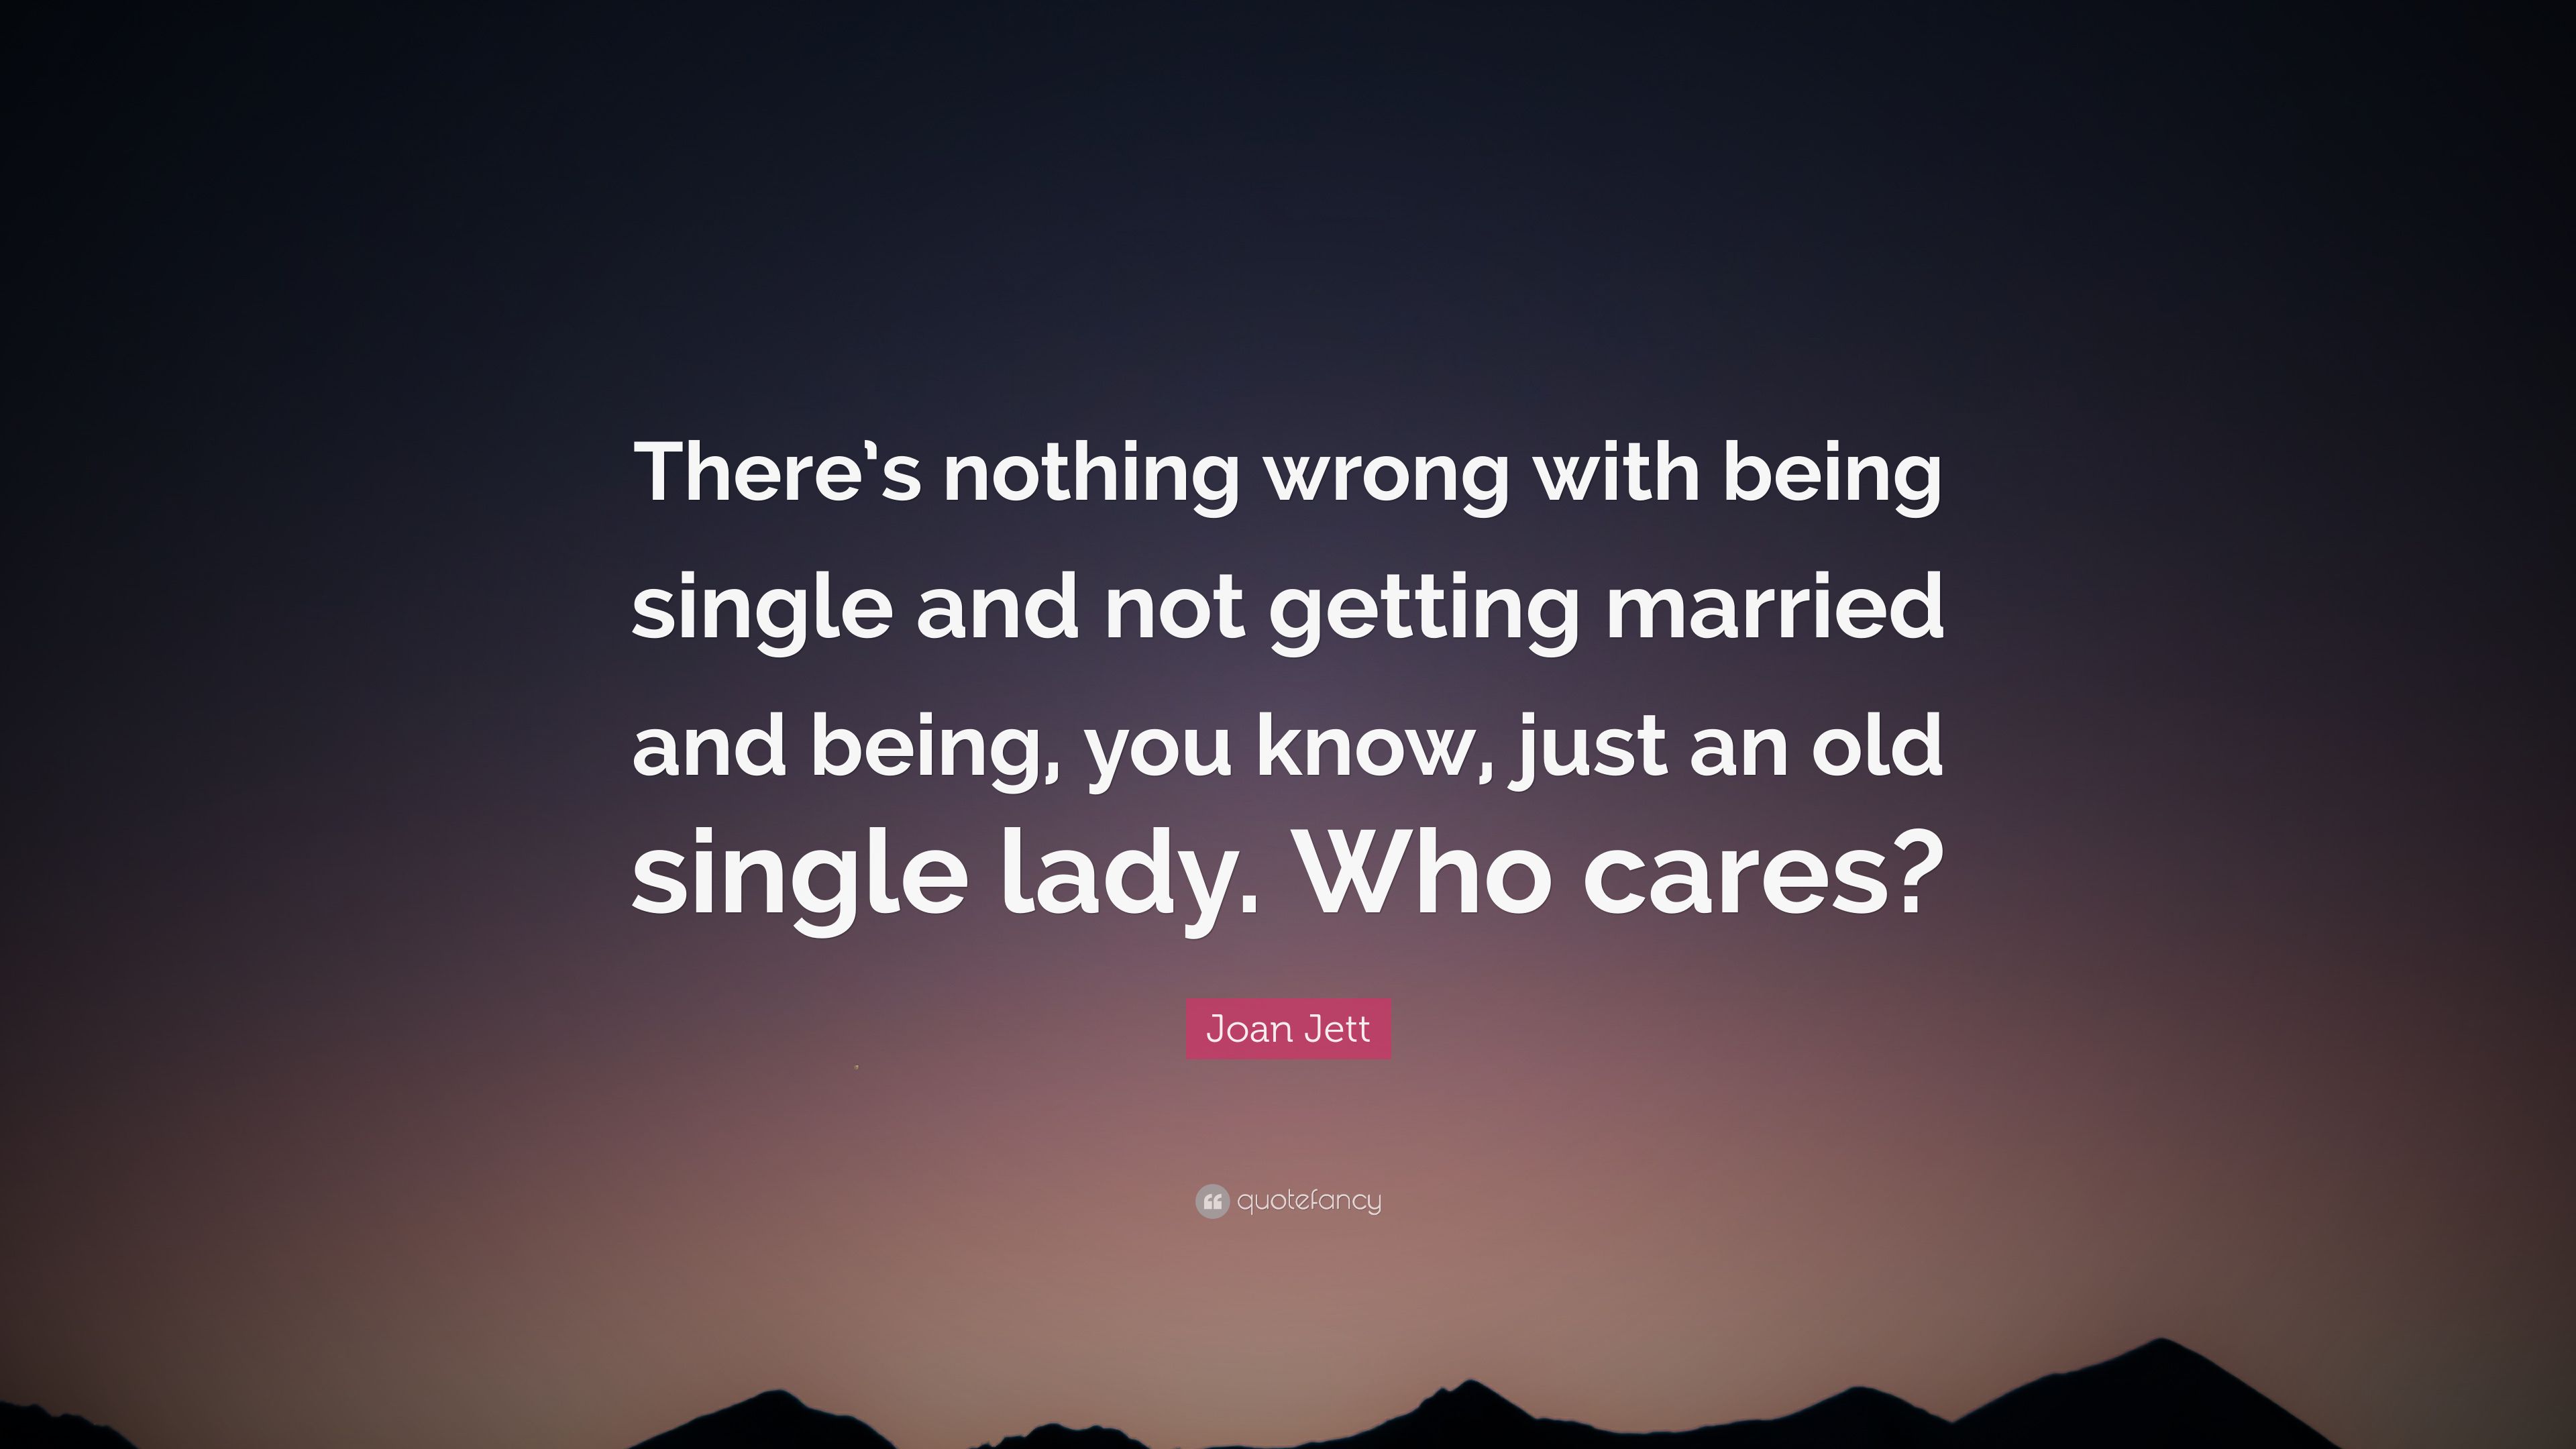 Joan Jett Quote: “There's nothing wrong with being single and not getting married and being, you know, just an old single lady. Who cares?” (7 wallpaper)